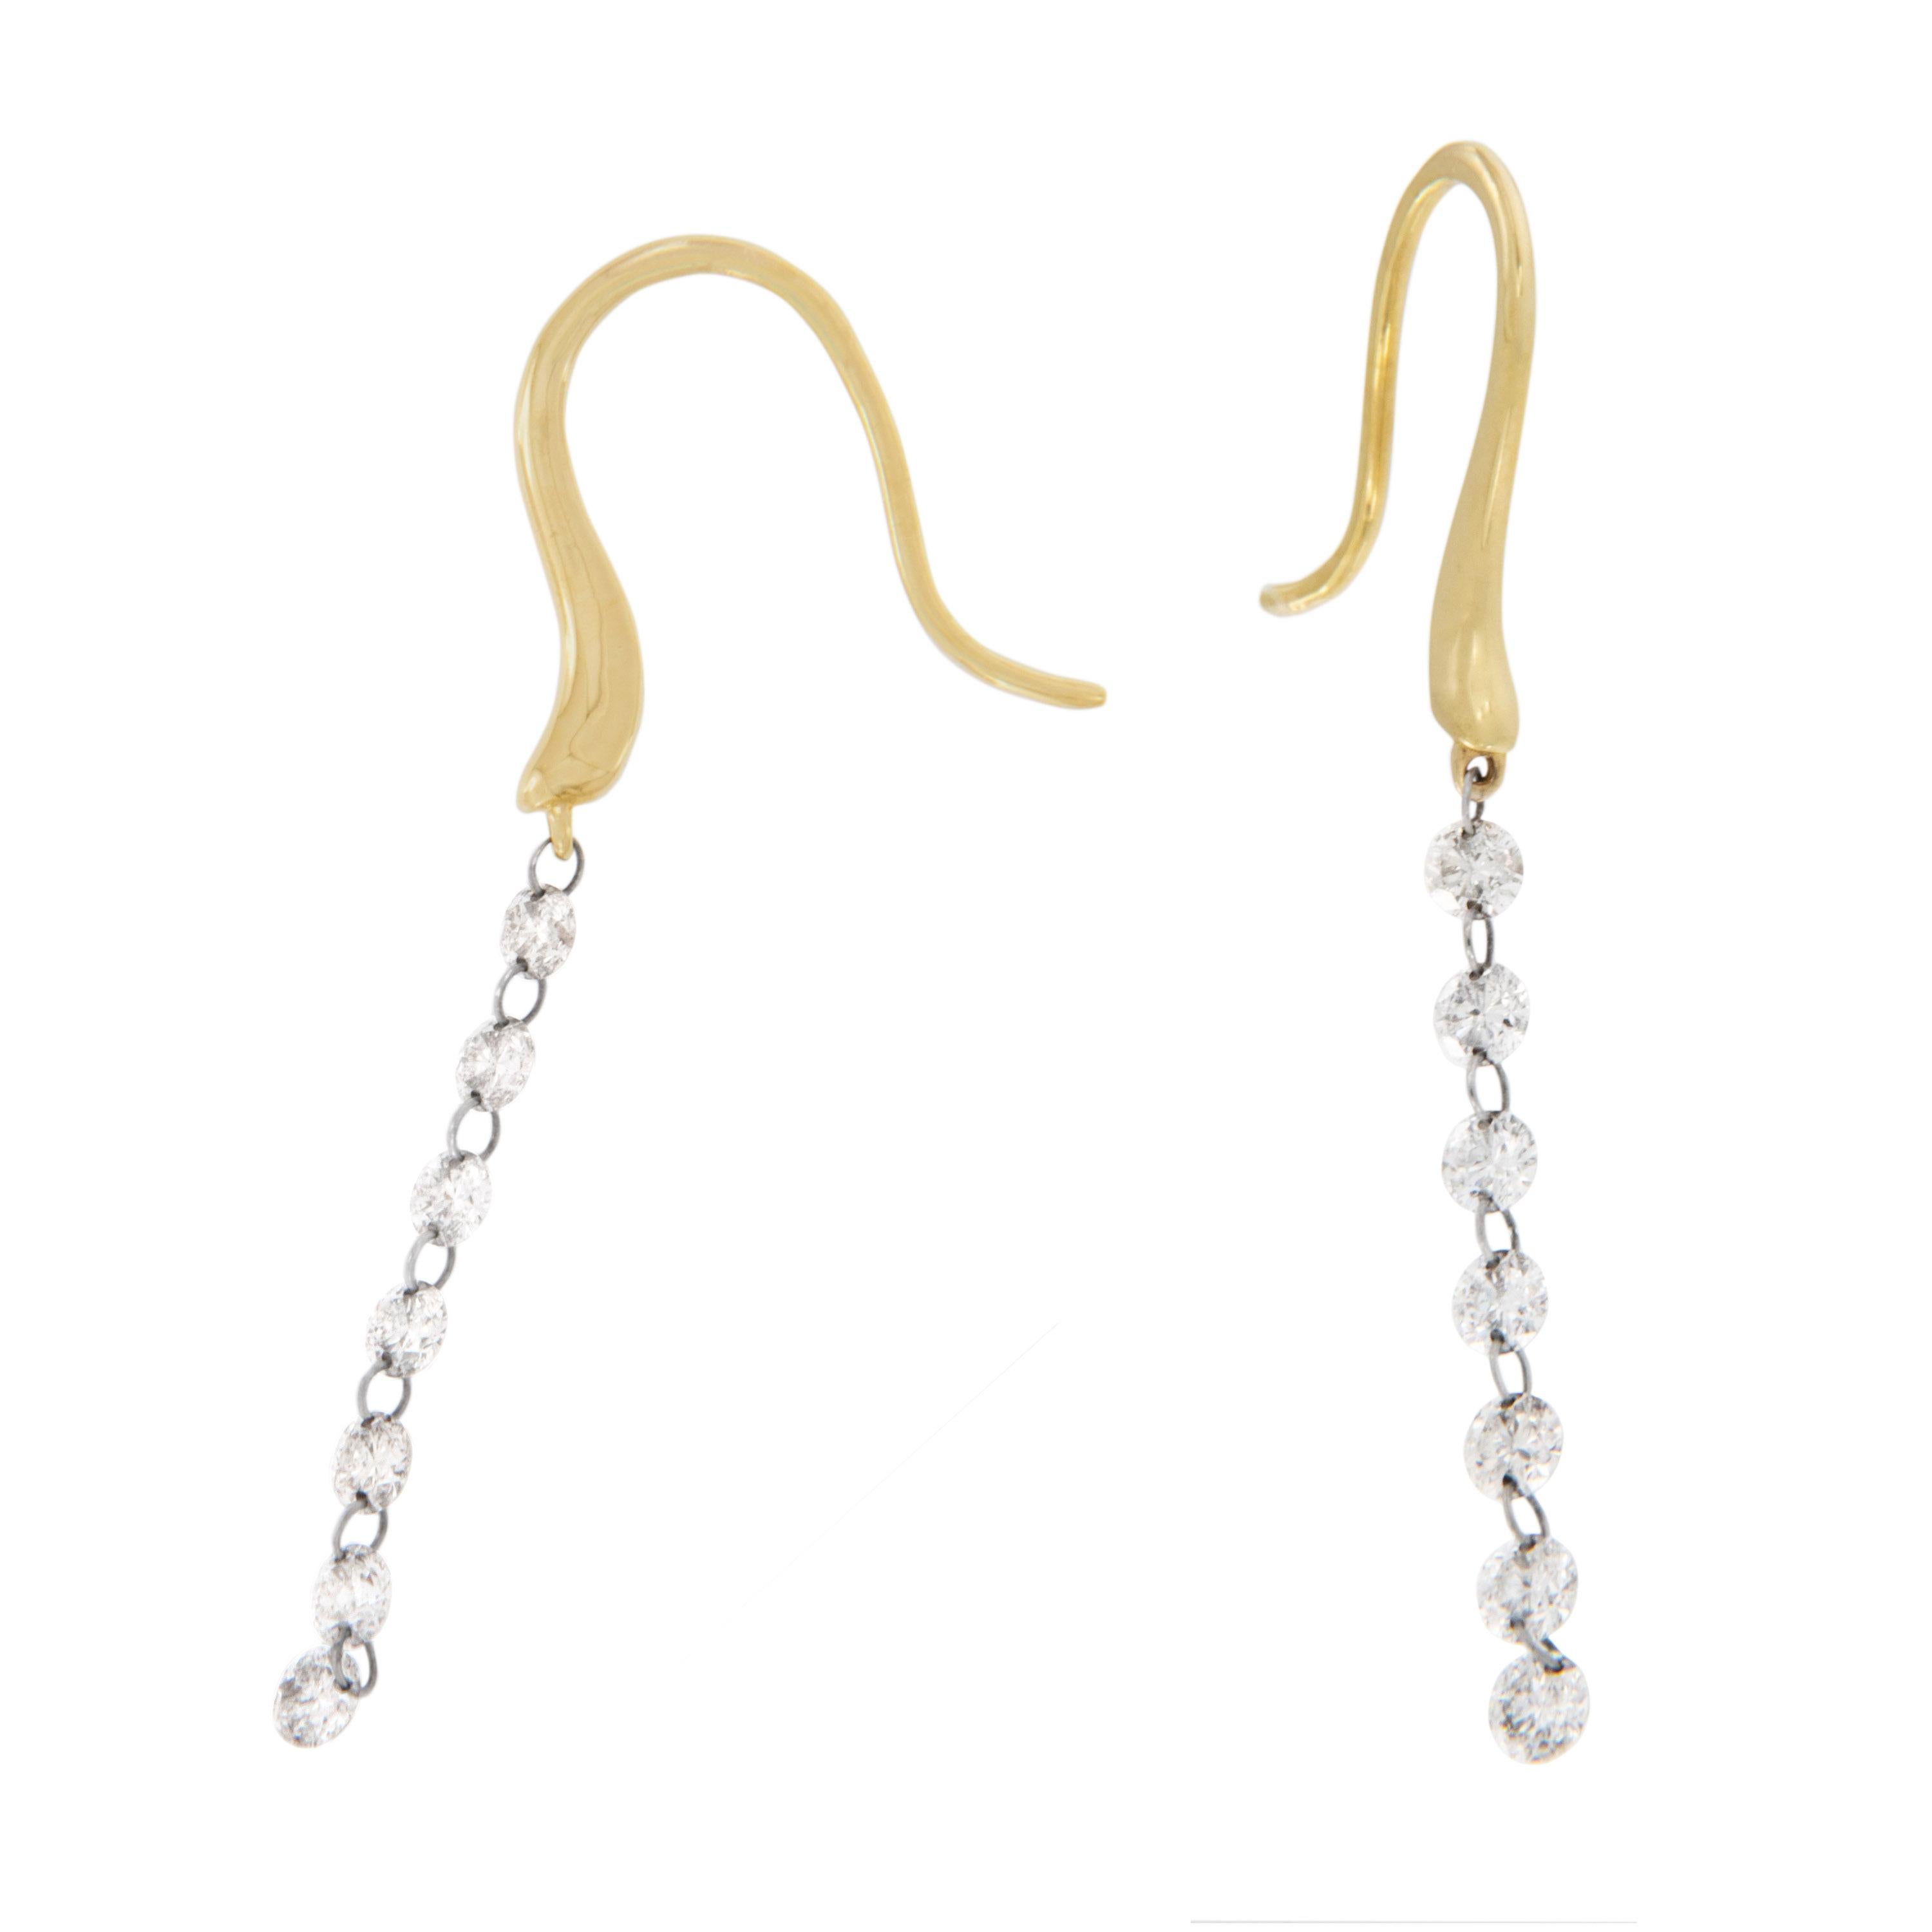 So fun and contemporary! These 18 karat yellow gold dangle diamond earrings contain 14 